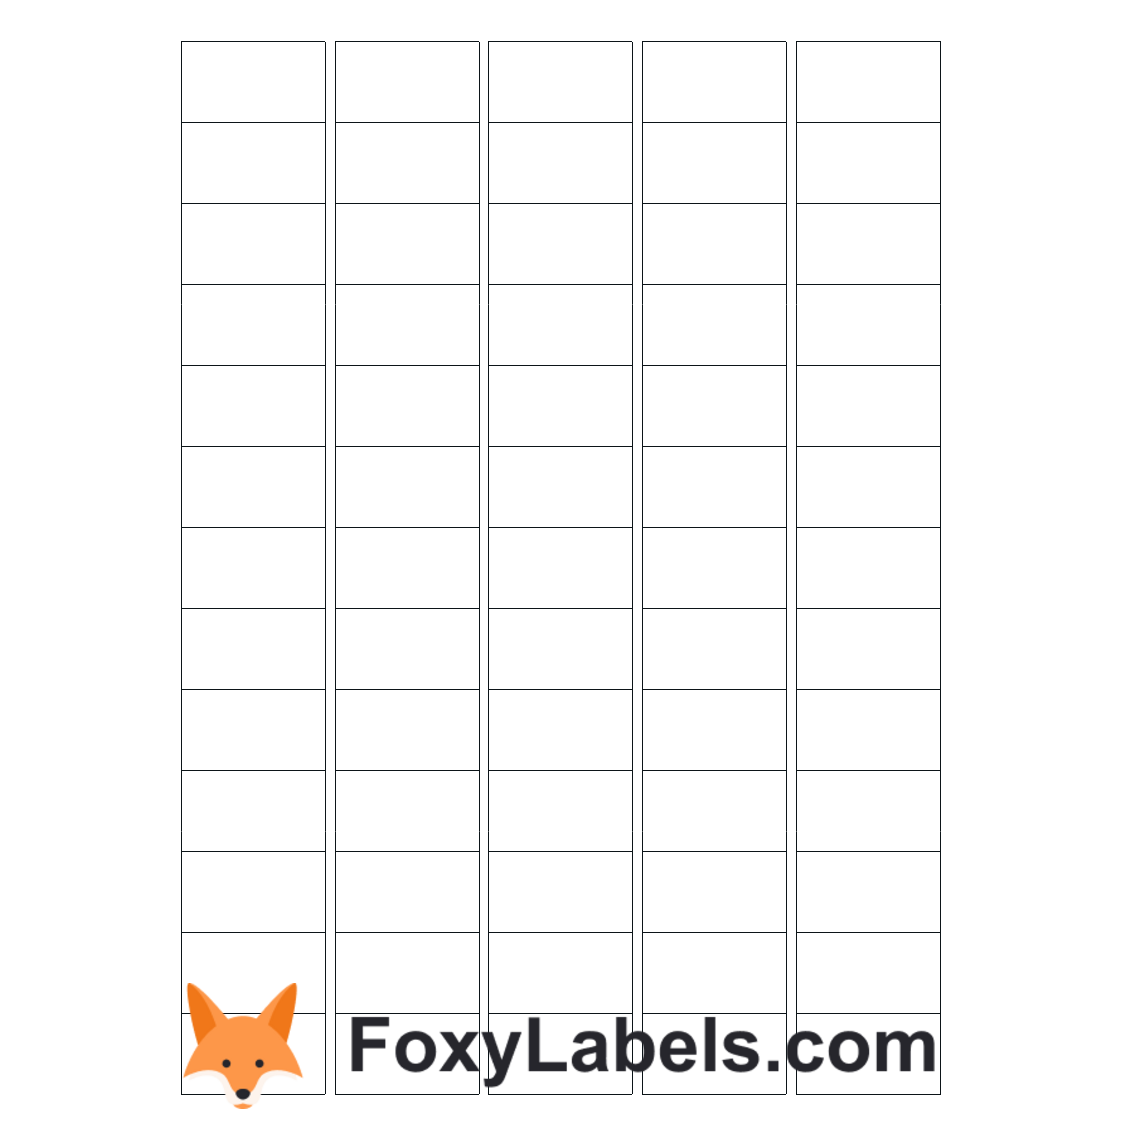 Avery-Zweckform L4790 label template for Google Docs